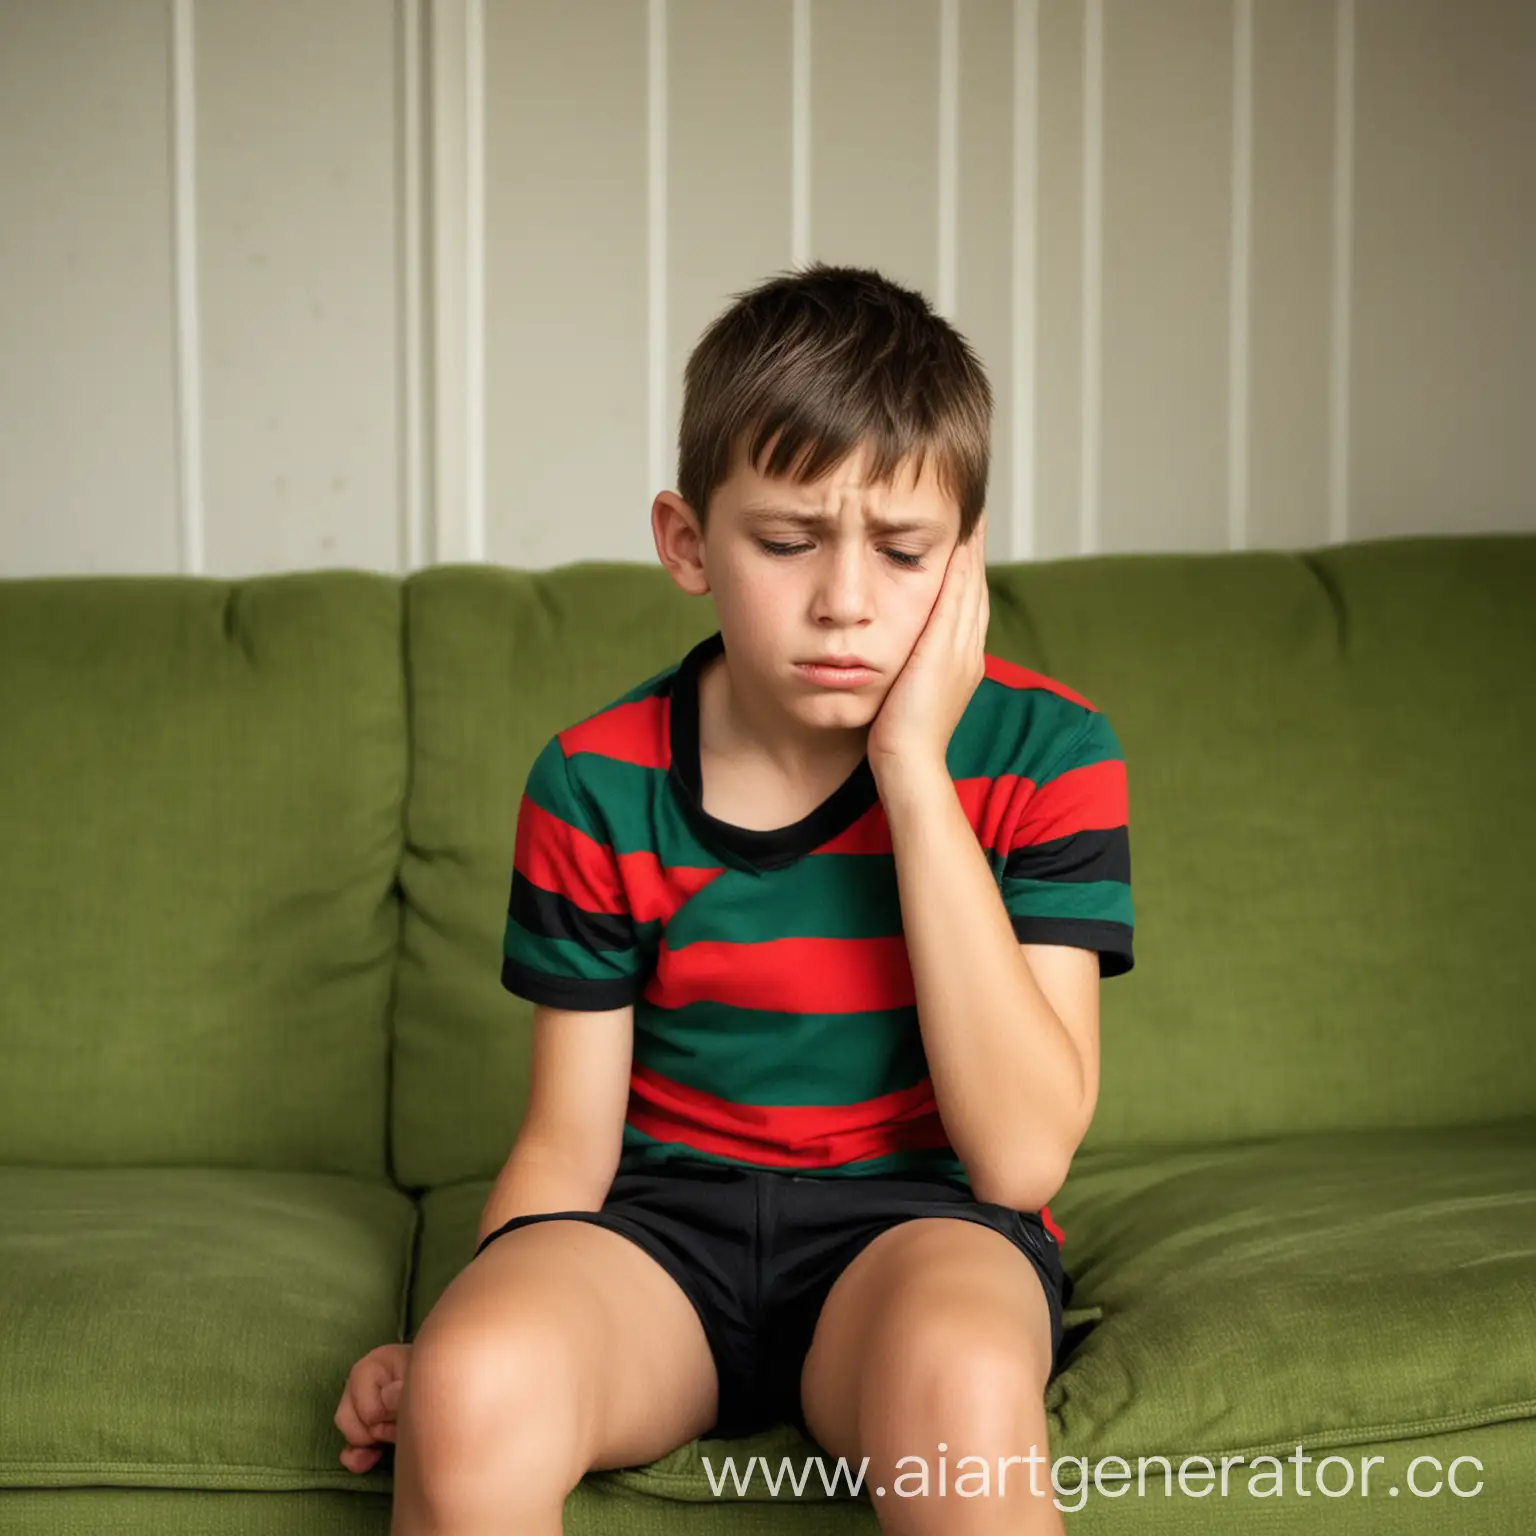 Sad-10YearOld-Boy-with-Toothache-on-Green-Couch